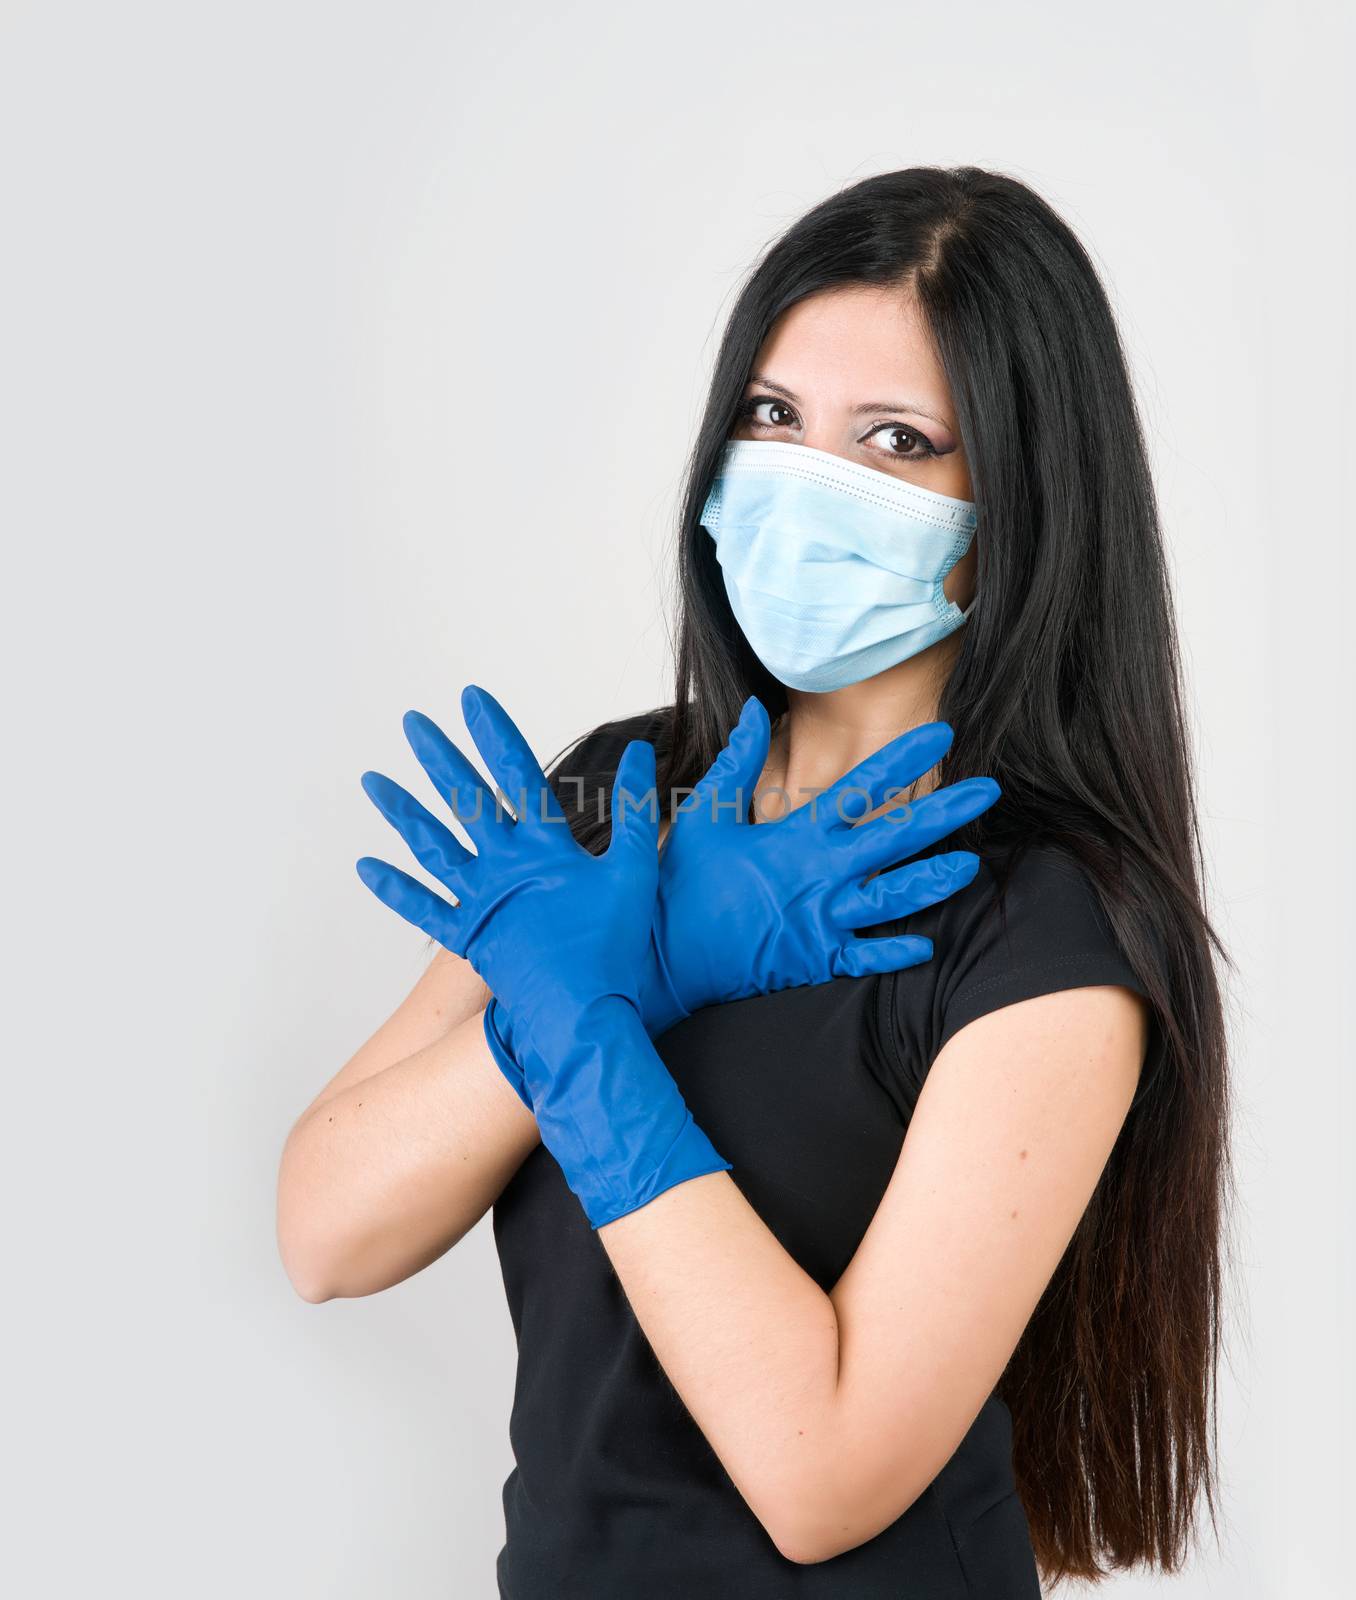 beautiful woman recommends what to wear for prevention, gloves and mask. isolated